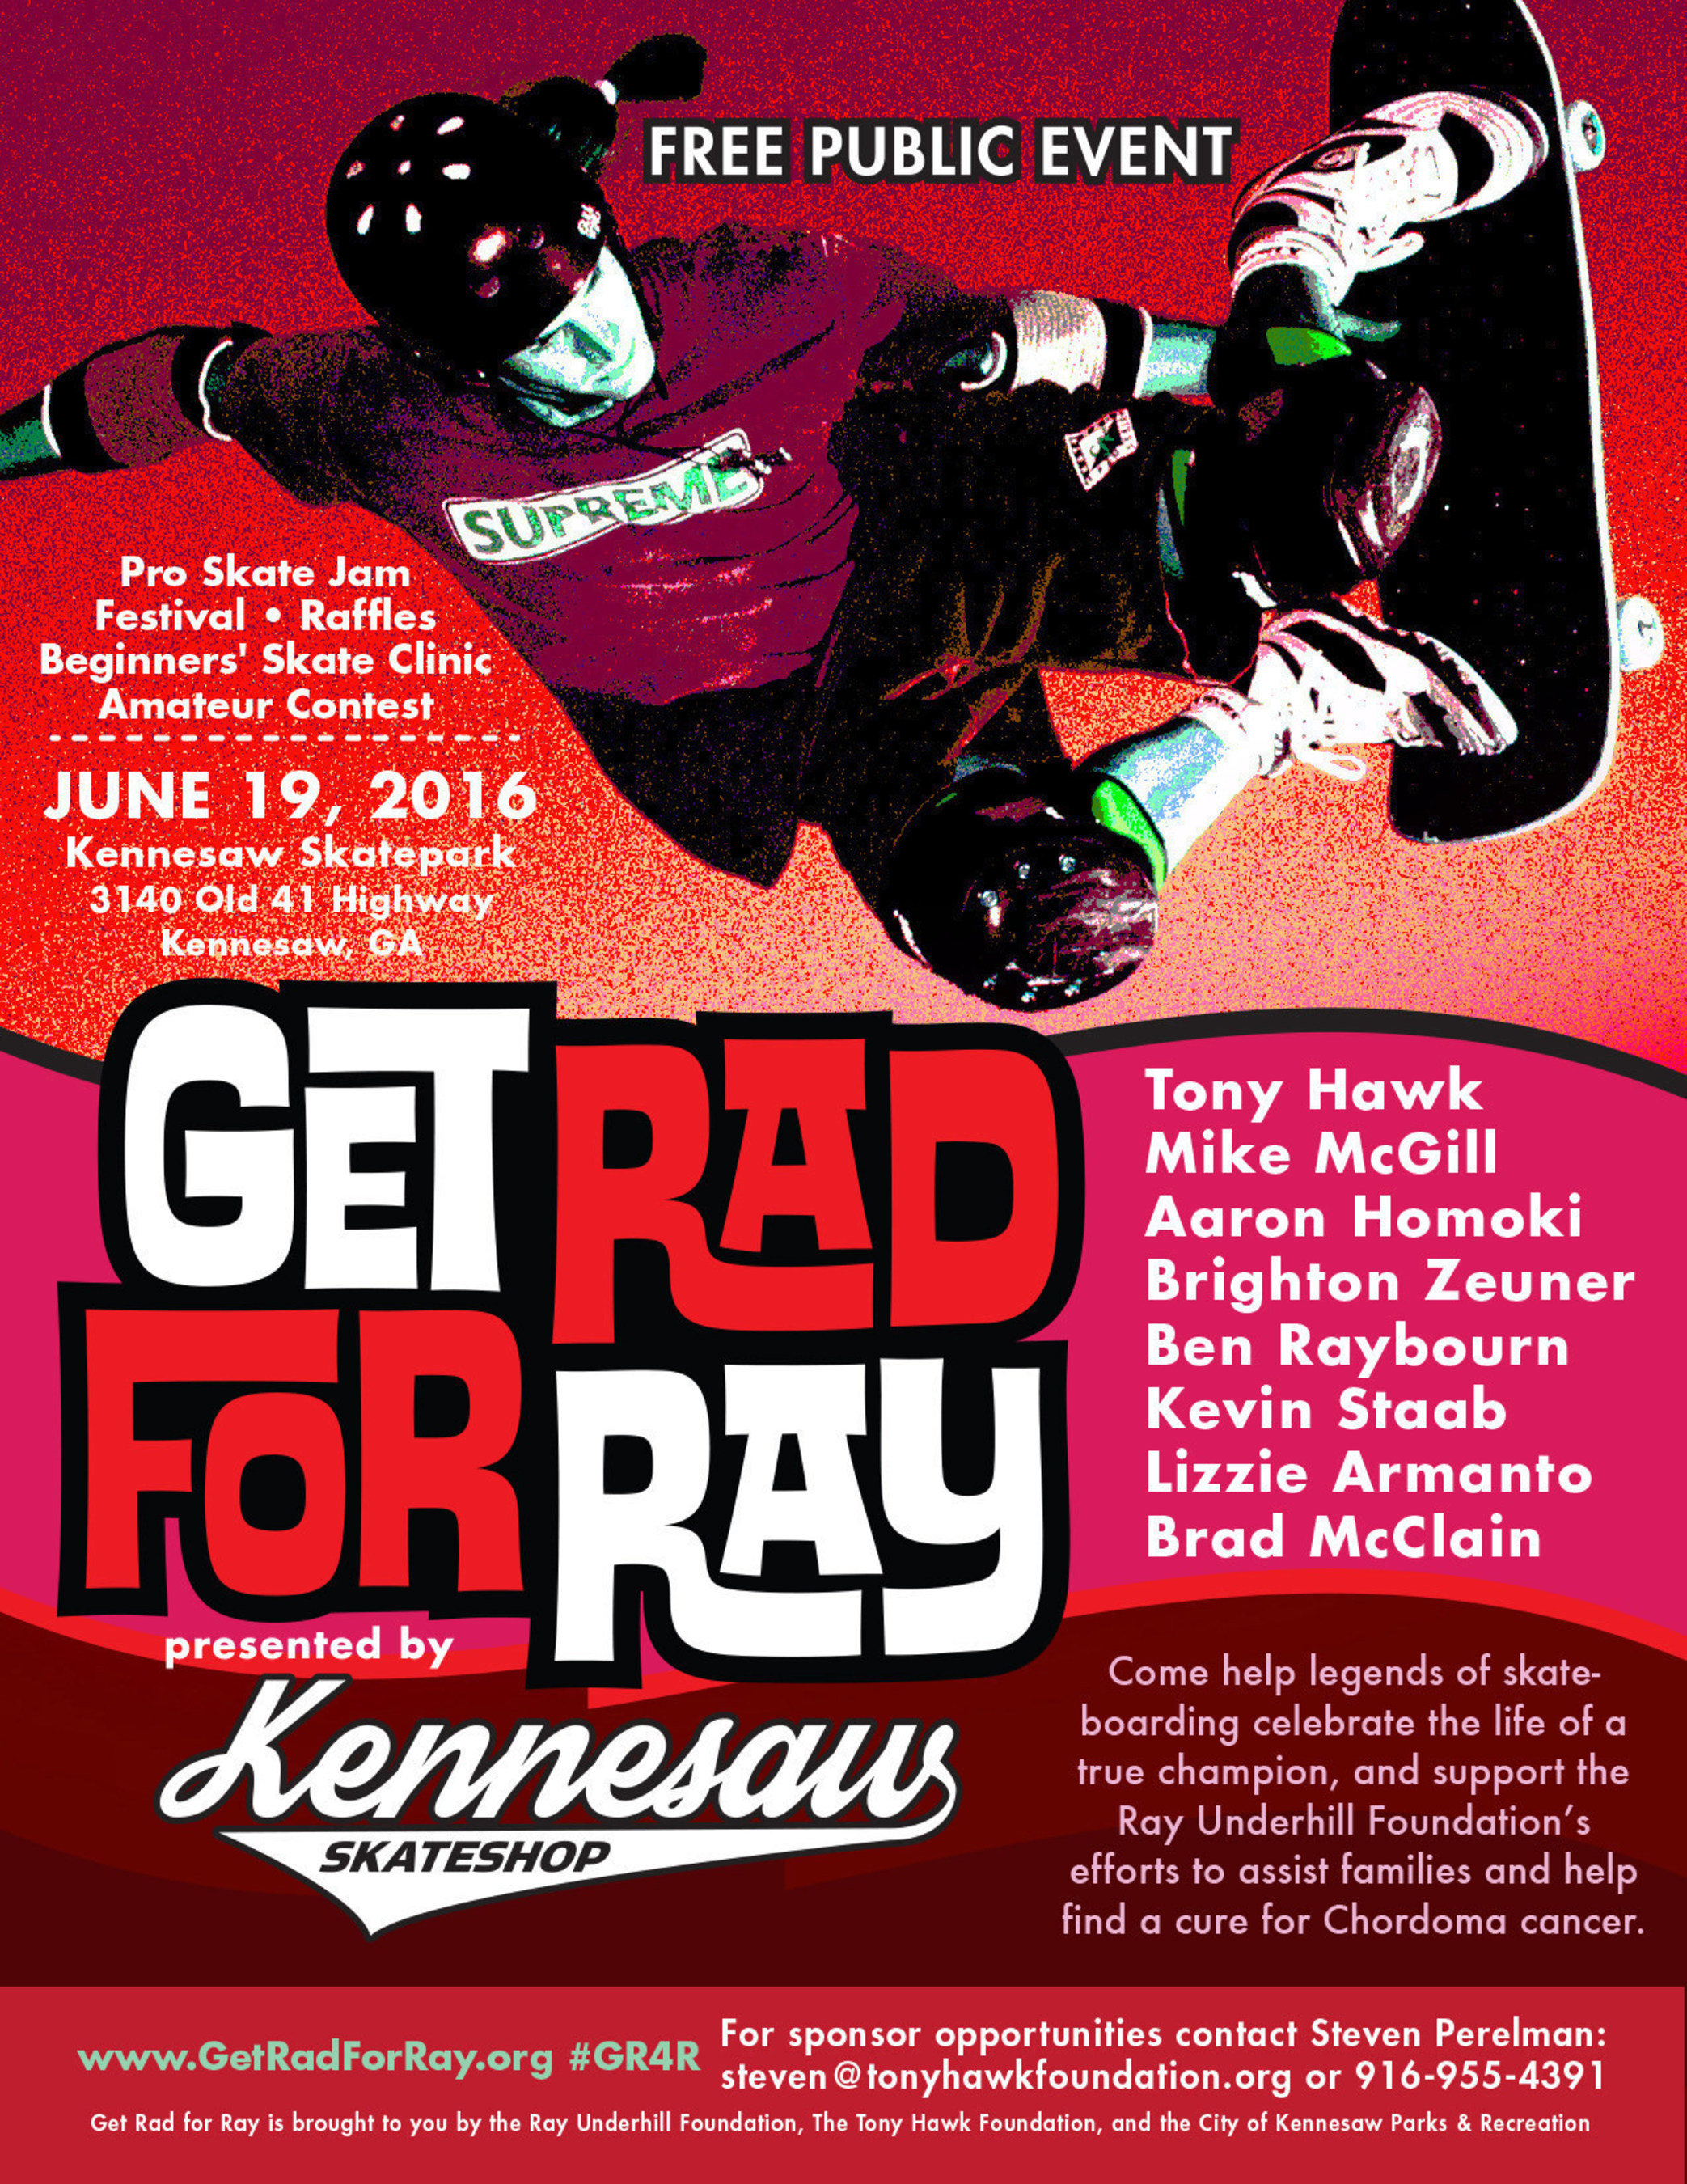 Get Rad For Ray brings the legends of skateboarding to Kennesaw, GA June 19, 2016. Photo: Grant Brittain